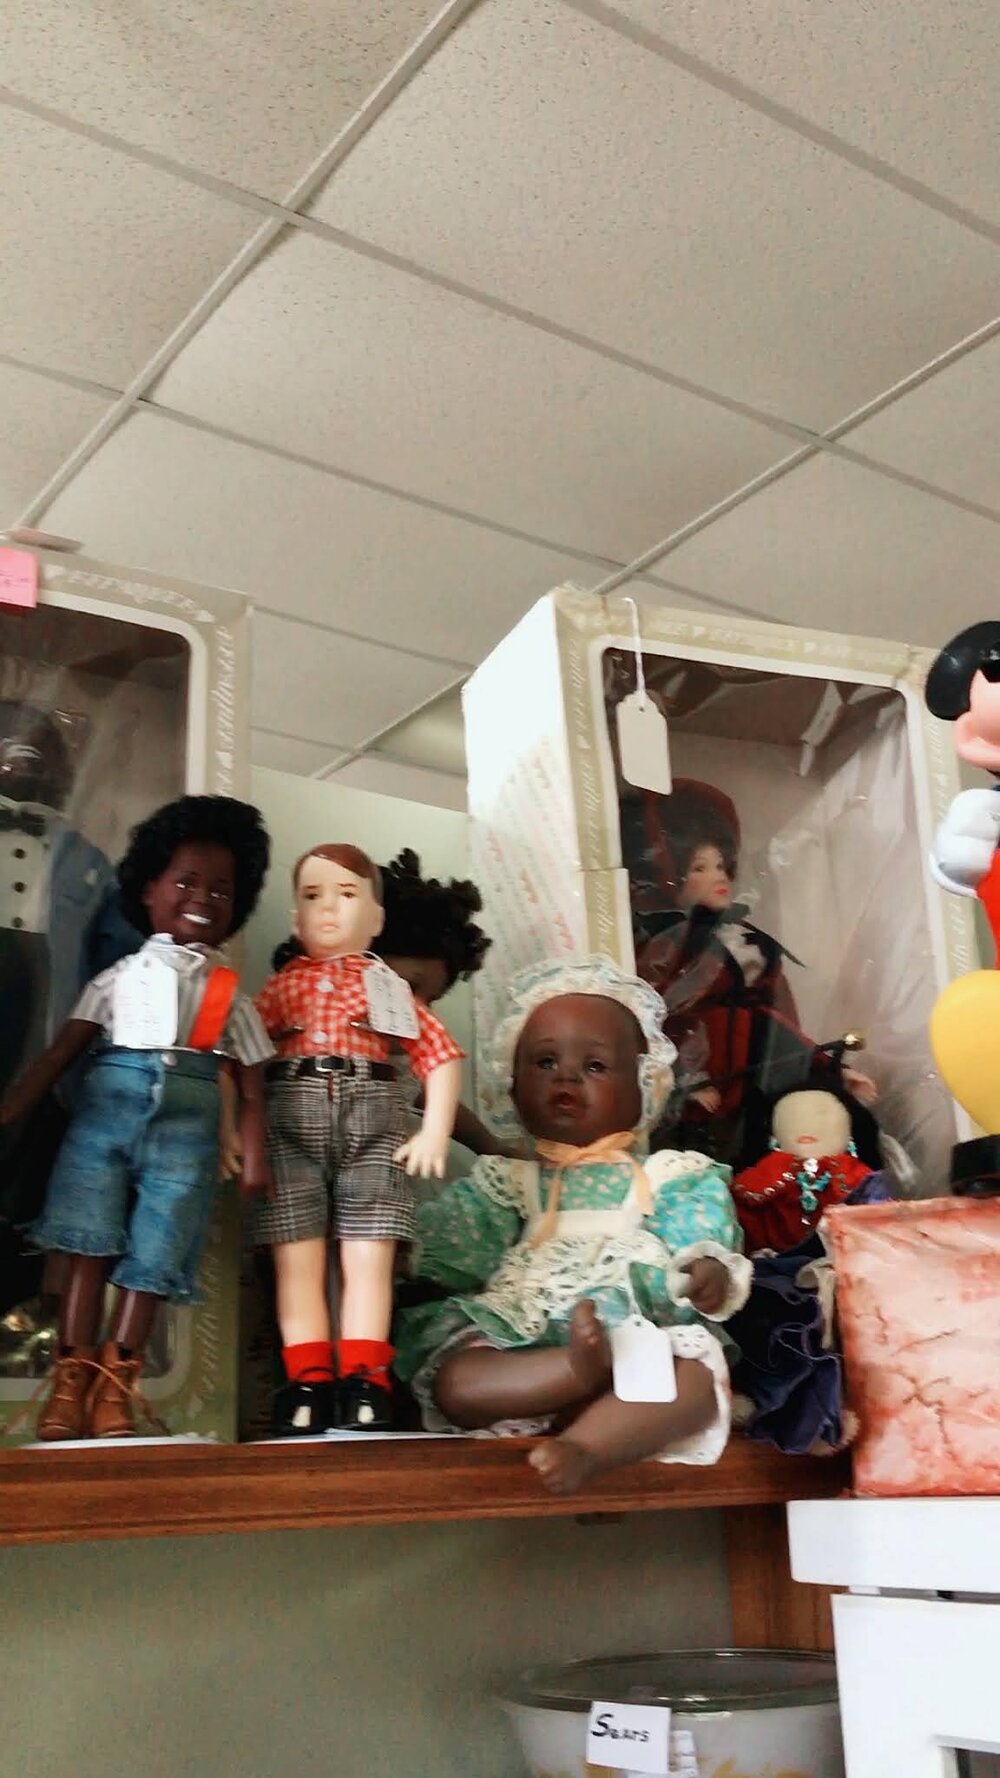 All About Those Quirky Finds: MADTV, Tea Pots, And Dolls!